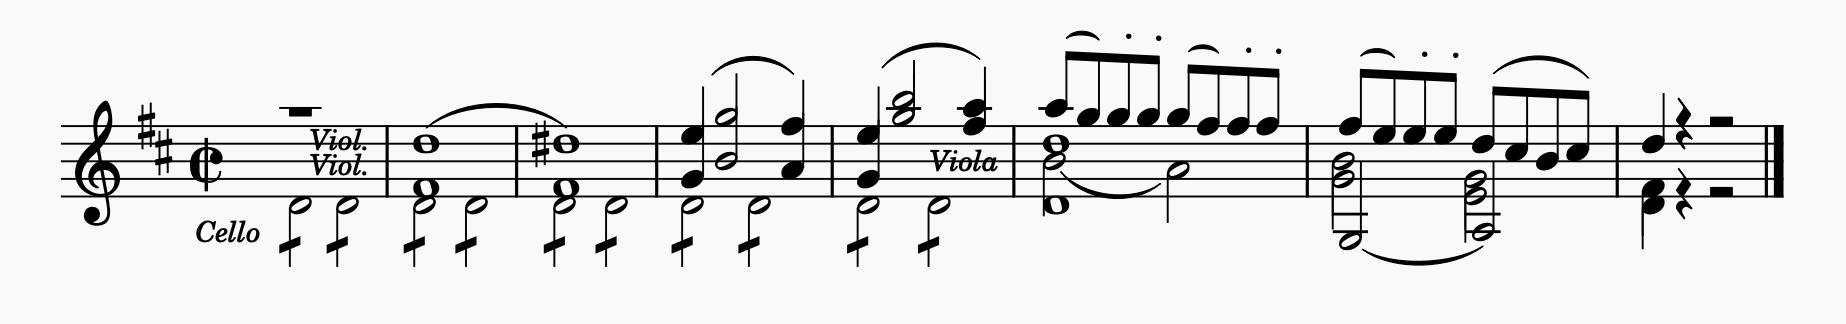 The music notatation after initial recreation with MuseScore.